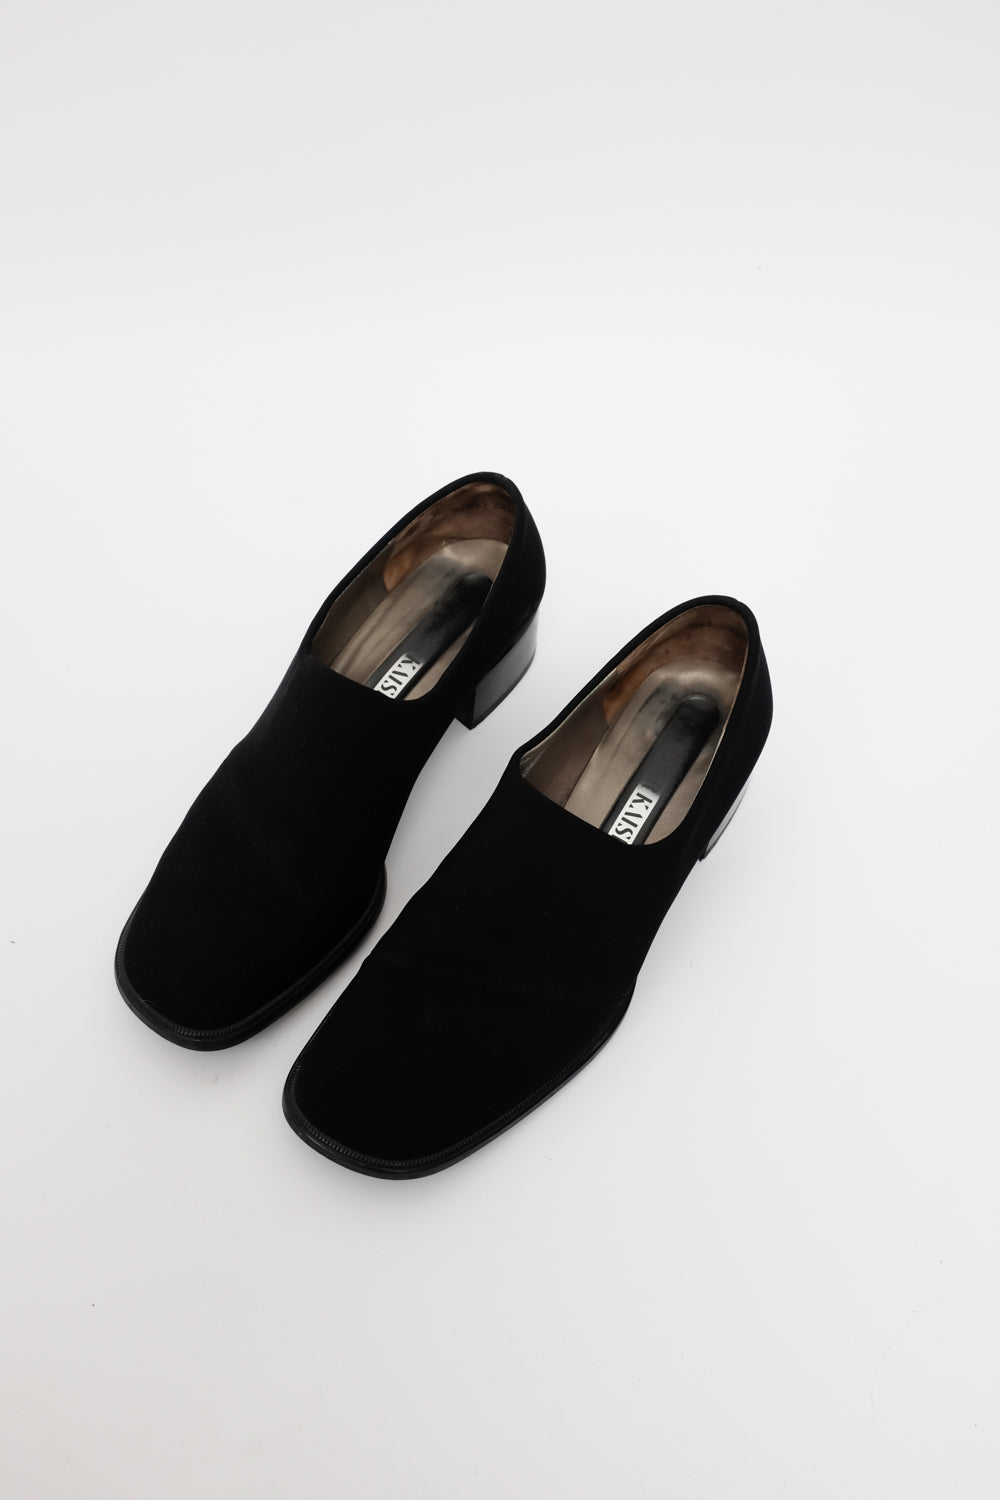 CLEAN 38 39 MINIMALIST BLACK LOAFER SHOES